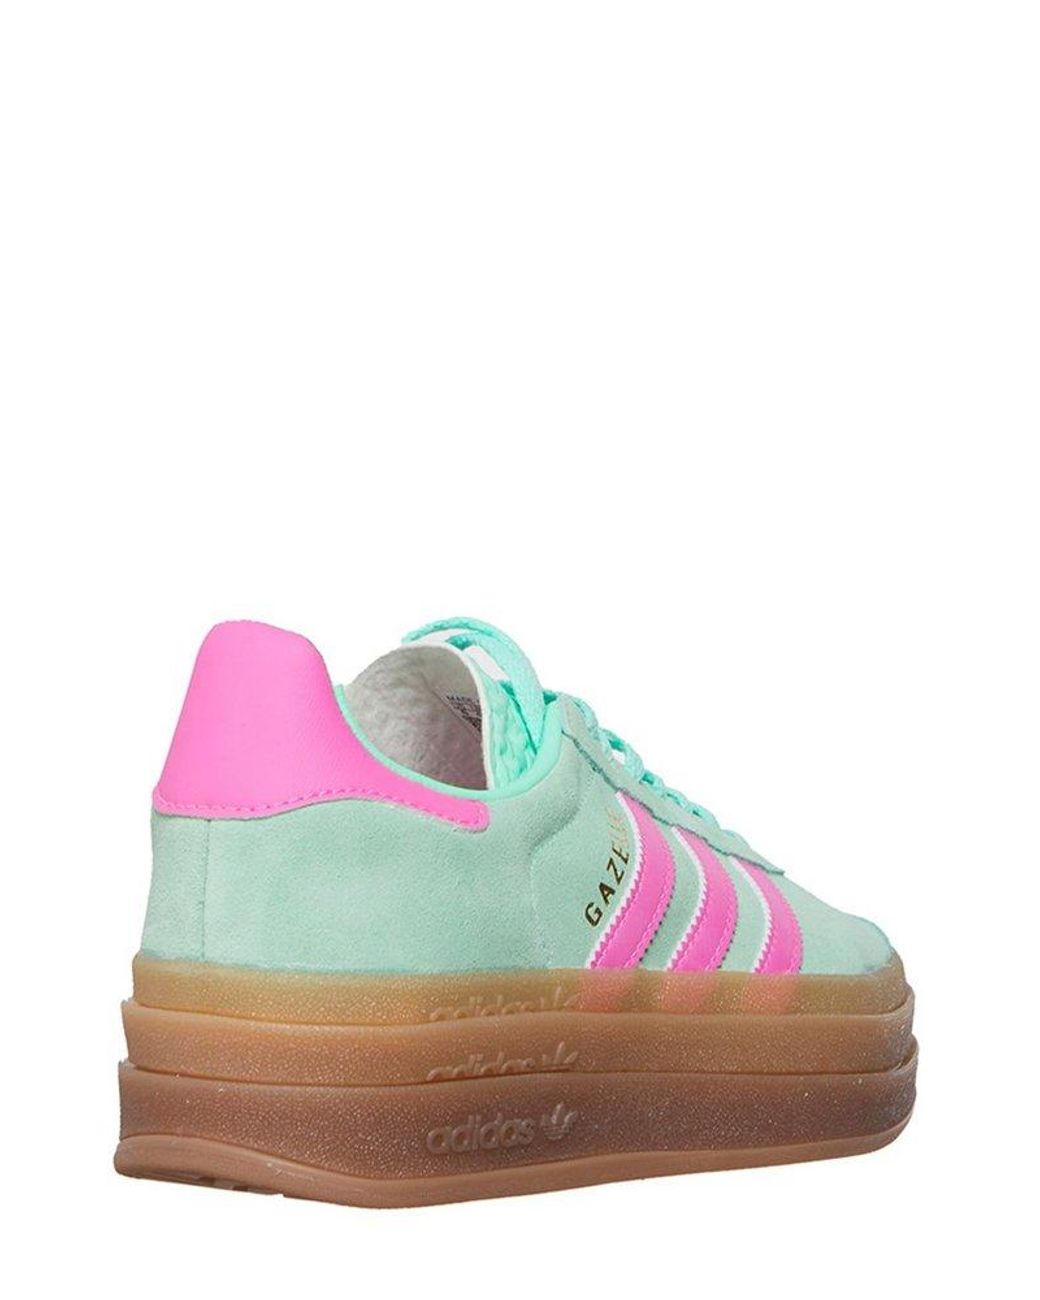 adidas Originals Gazelle Bold Lace-up Sneakers in Green | Lyst